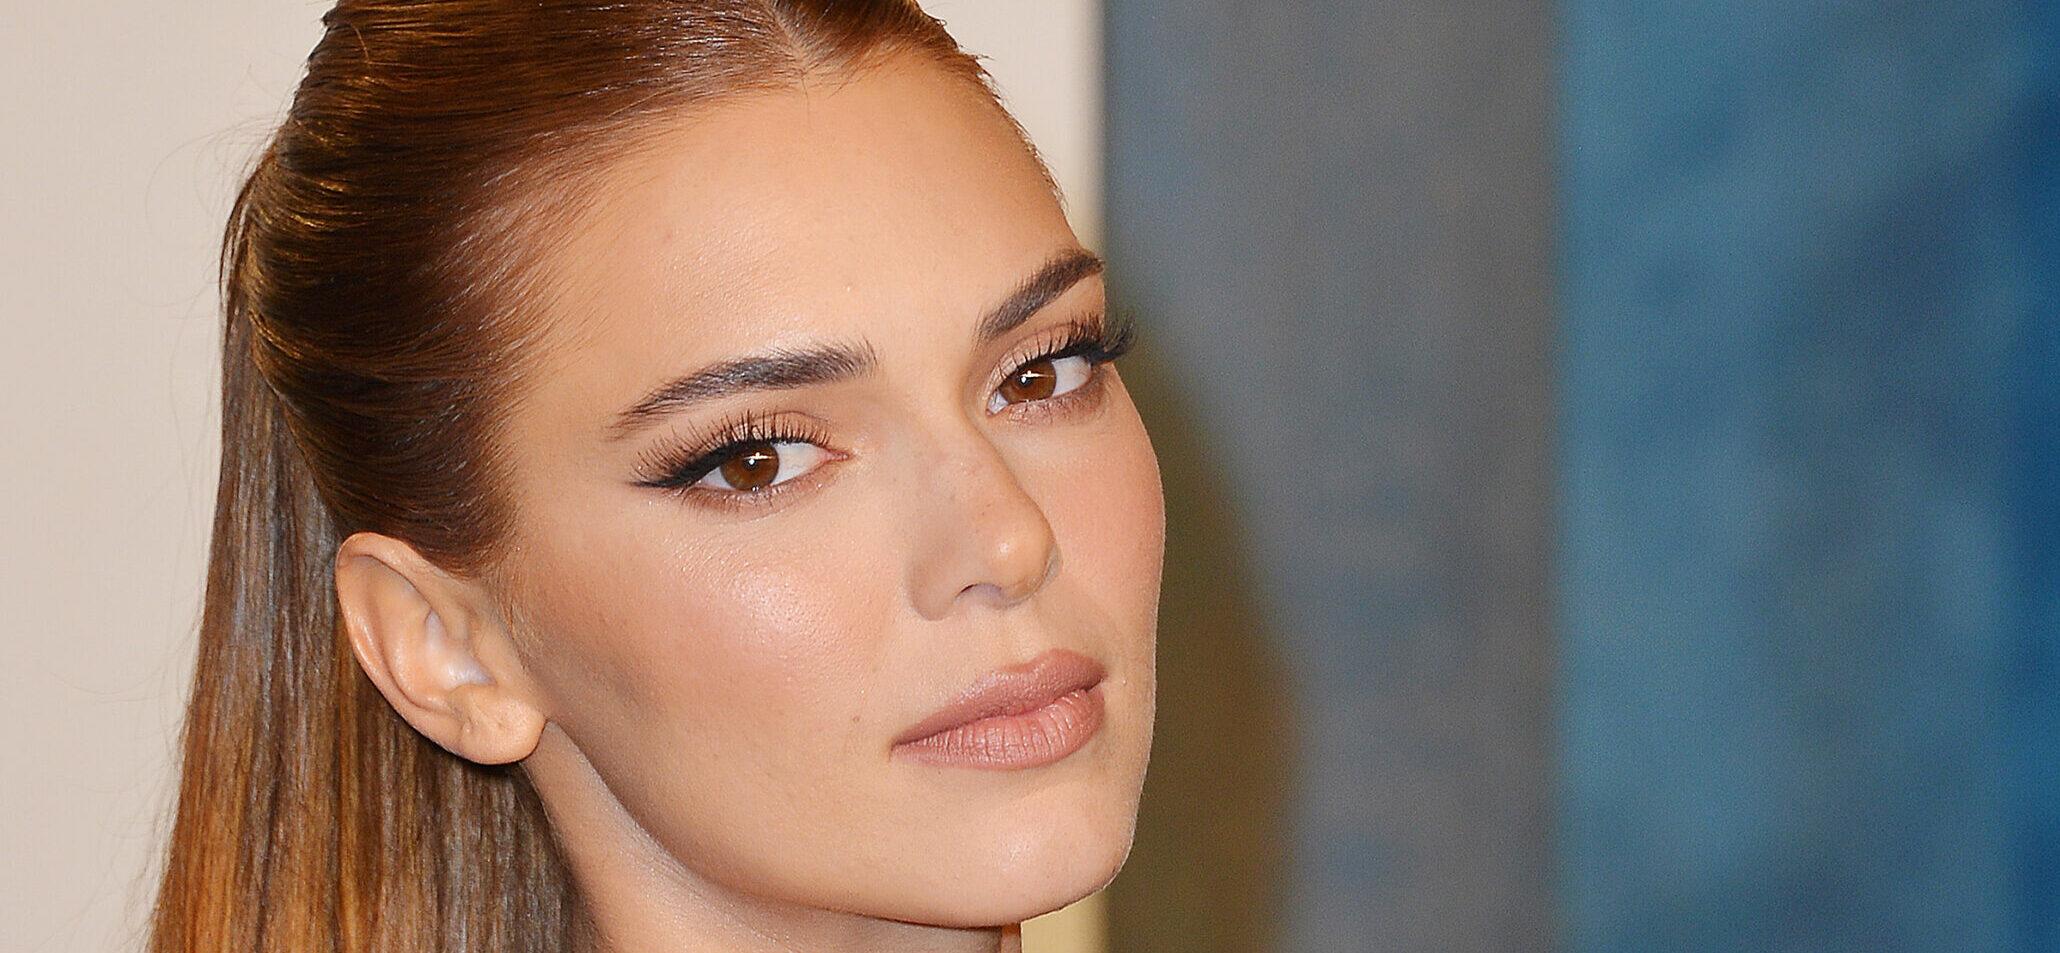 Kendall Jenner Is Legitimately Upset About Her Viral Cucumber Moment